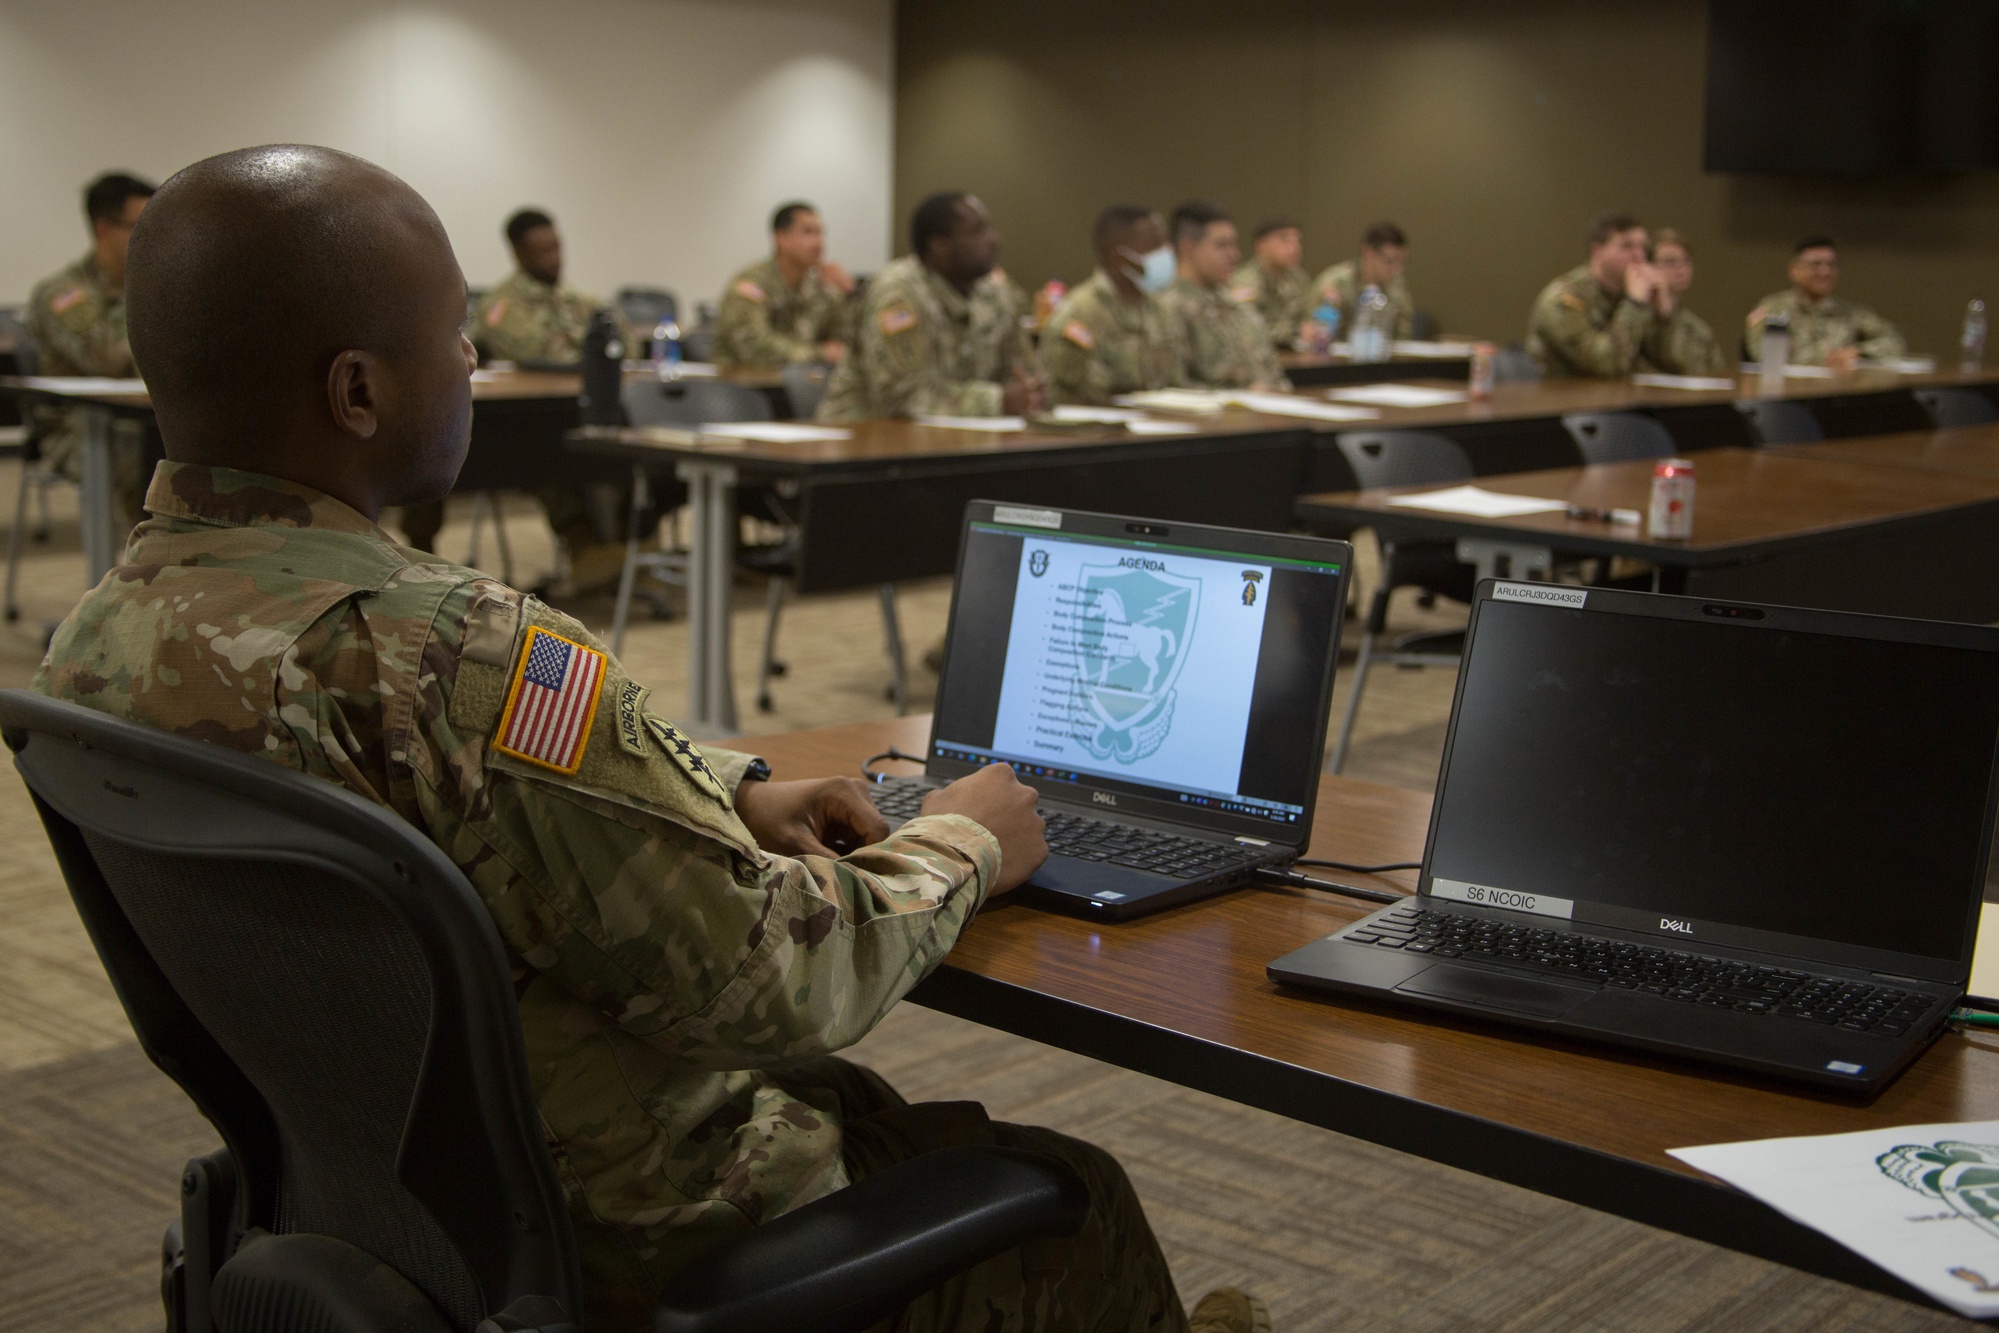 DVIDS - Images - 10th SFG (A) Soldiers attend NCOA [Image 1 of 4]